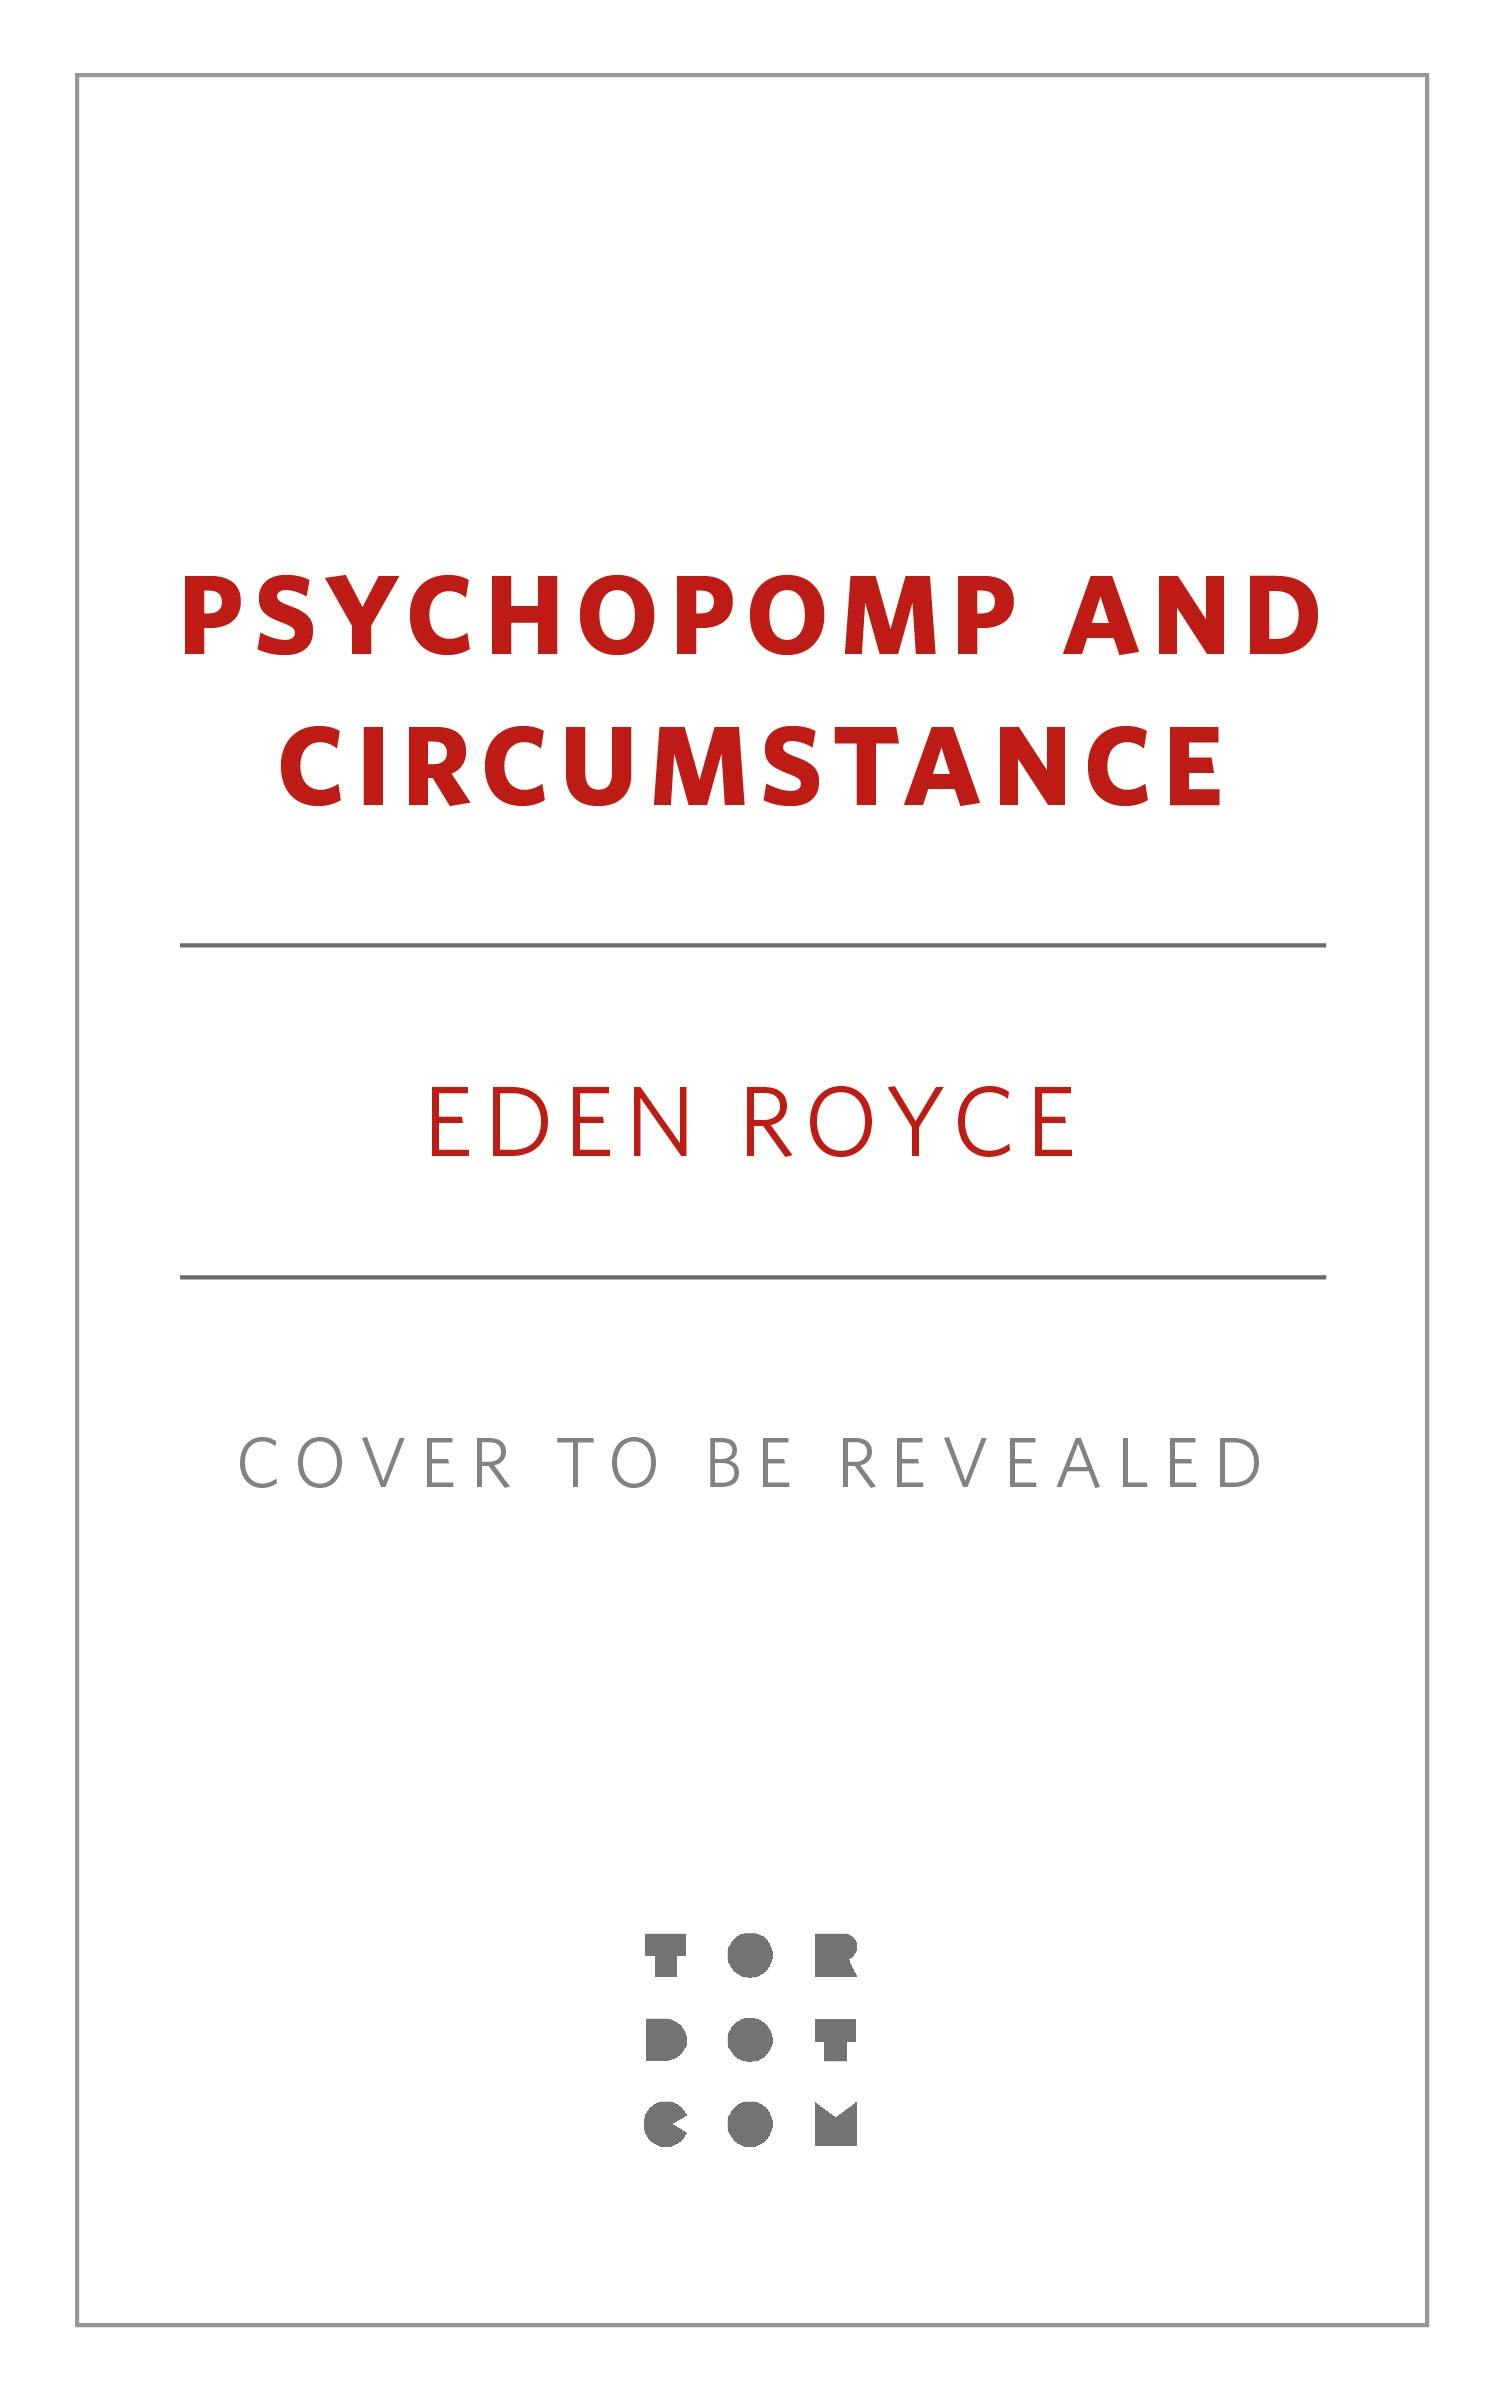 Cover for the book titled as: Psychopomp and Circumstance